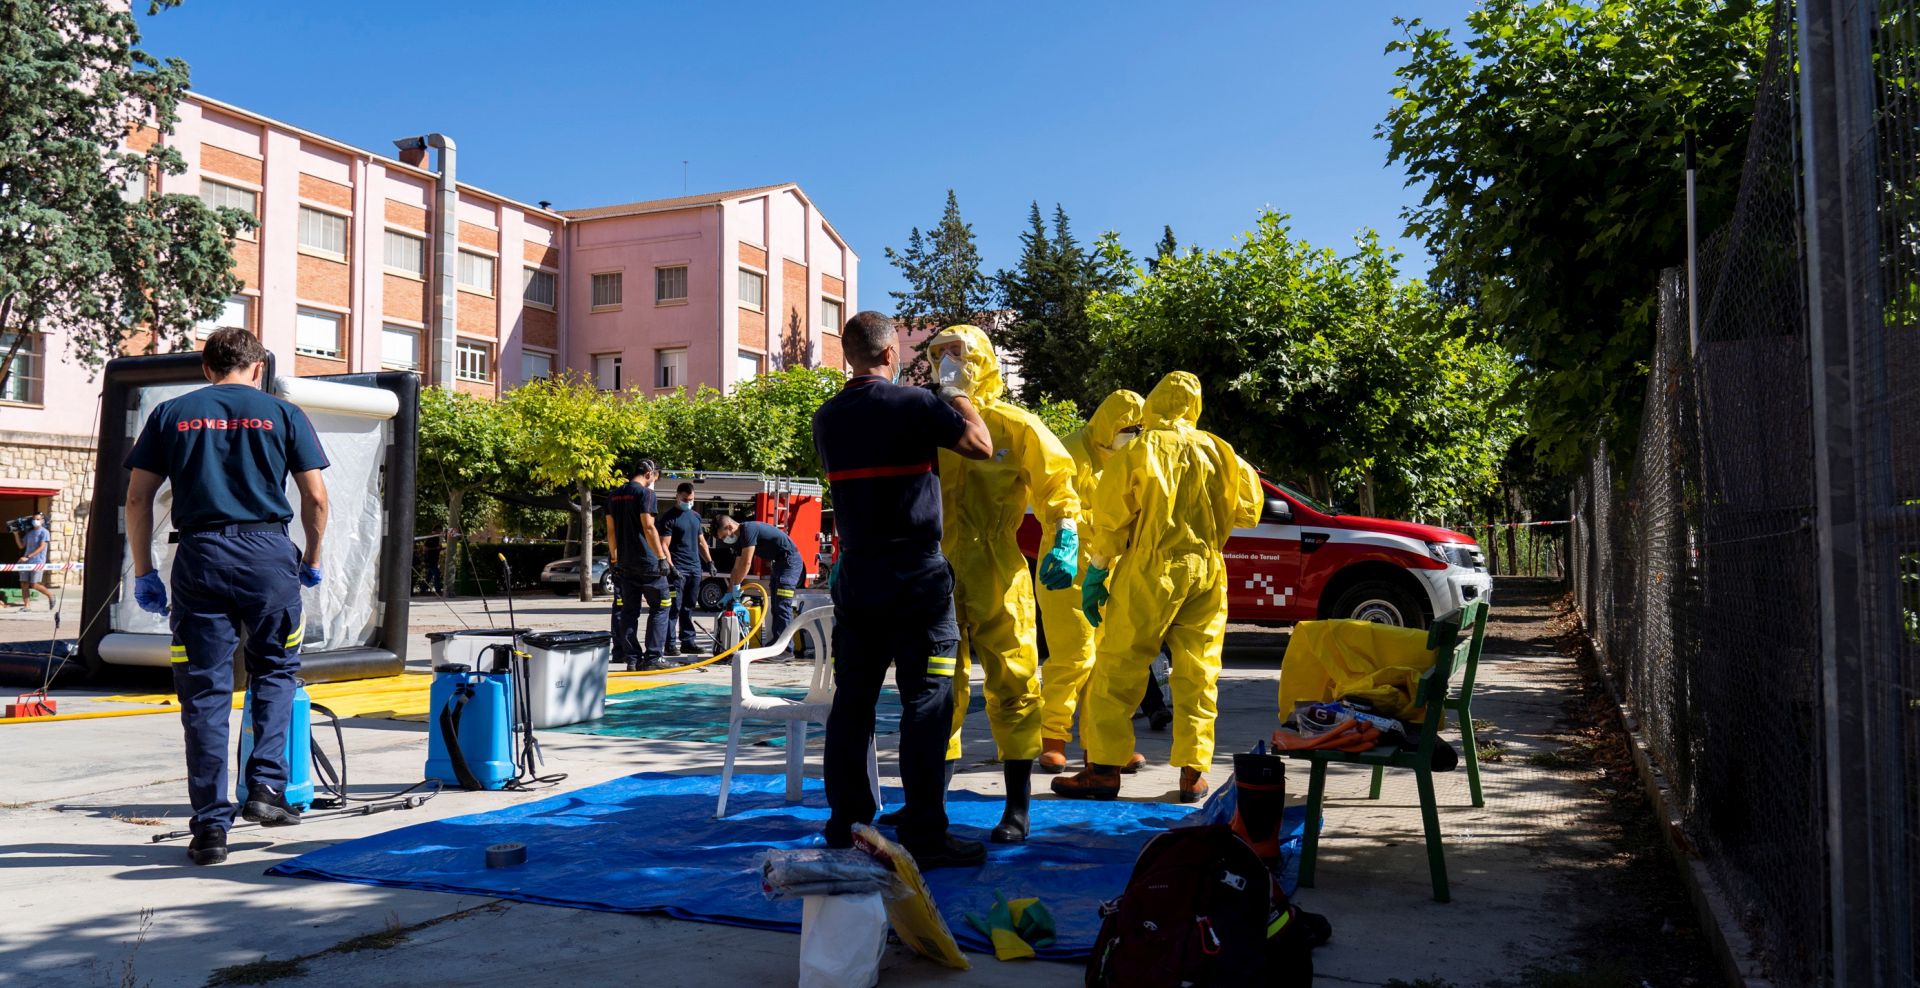 epa08583027 Local firefighters disinfect a care home in Burbaguena, Teruel, Spain, 04 August 2020. A Coronavirus outbreak has been detected in a care home in Burbaguena.  EPA/Antonio Garcia